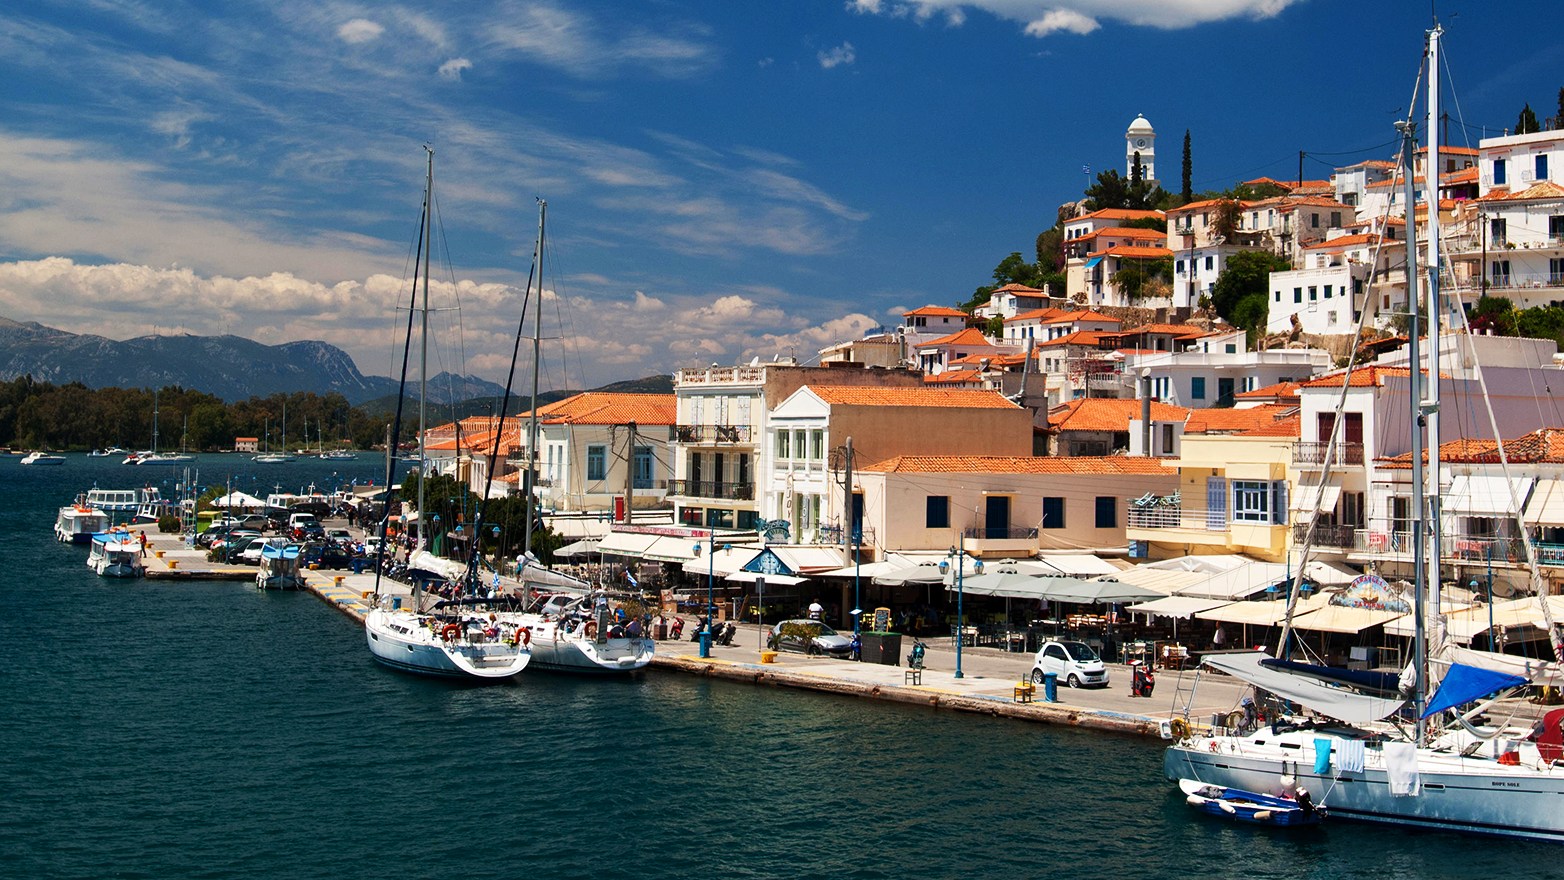 The harbour at Hydra